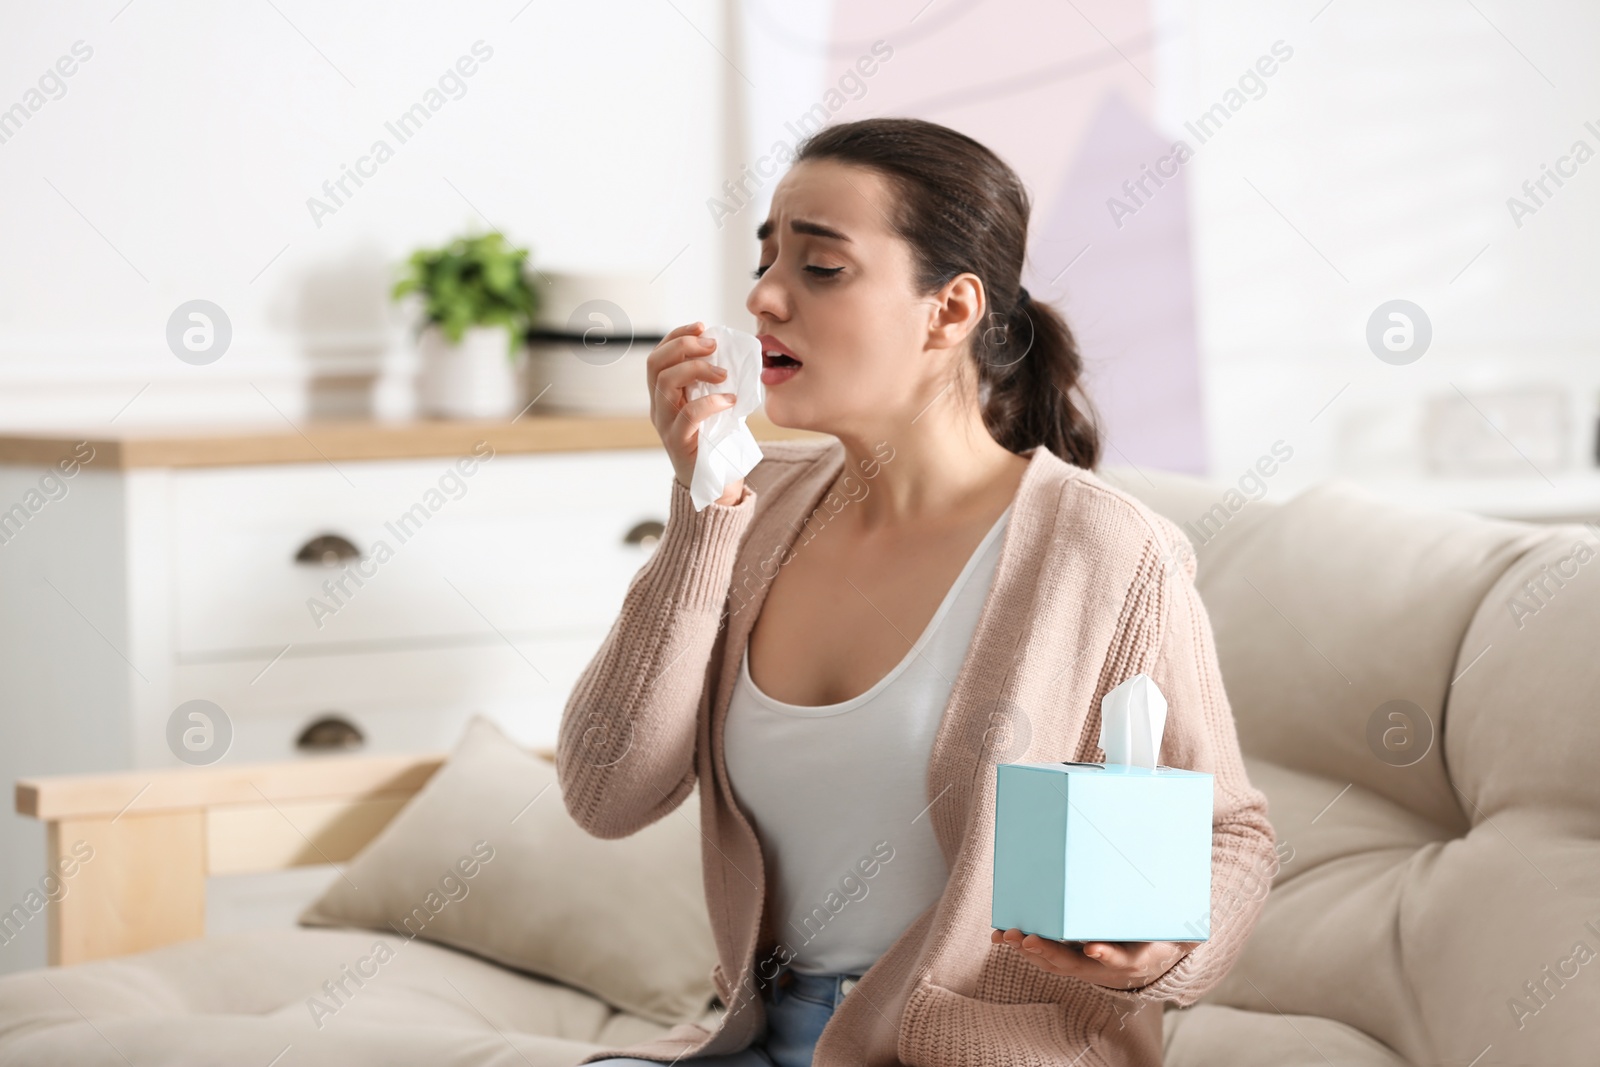 Photo of Young woman suffering from runny nose in living room